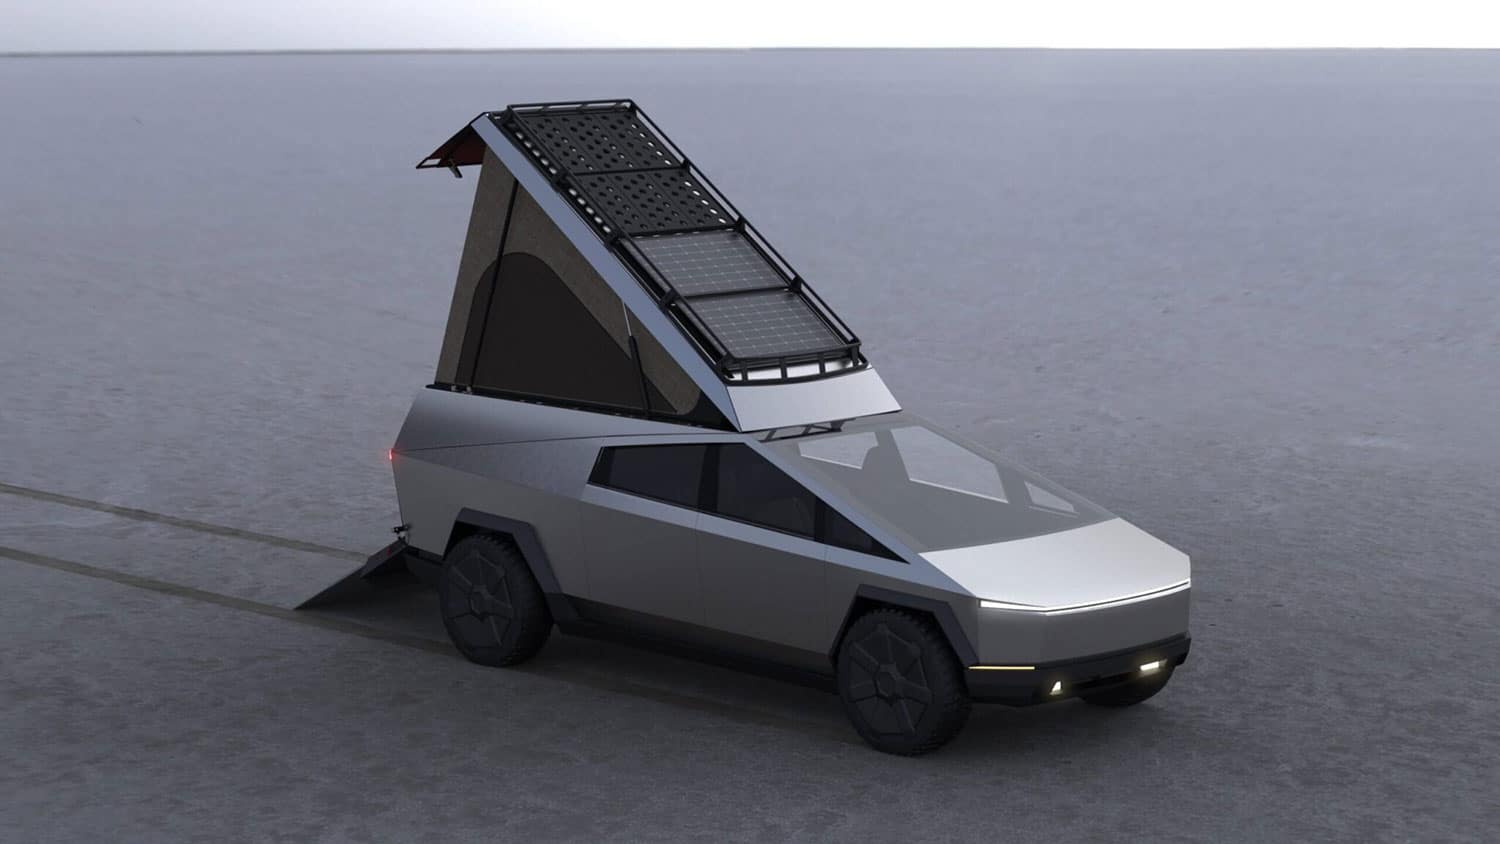 Space Camper's prototype of a wedge style camper for the Cybertruck